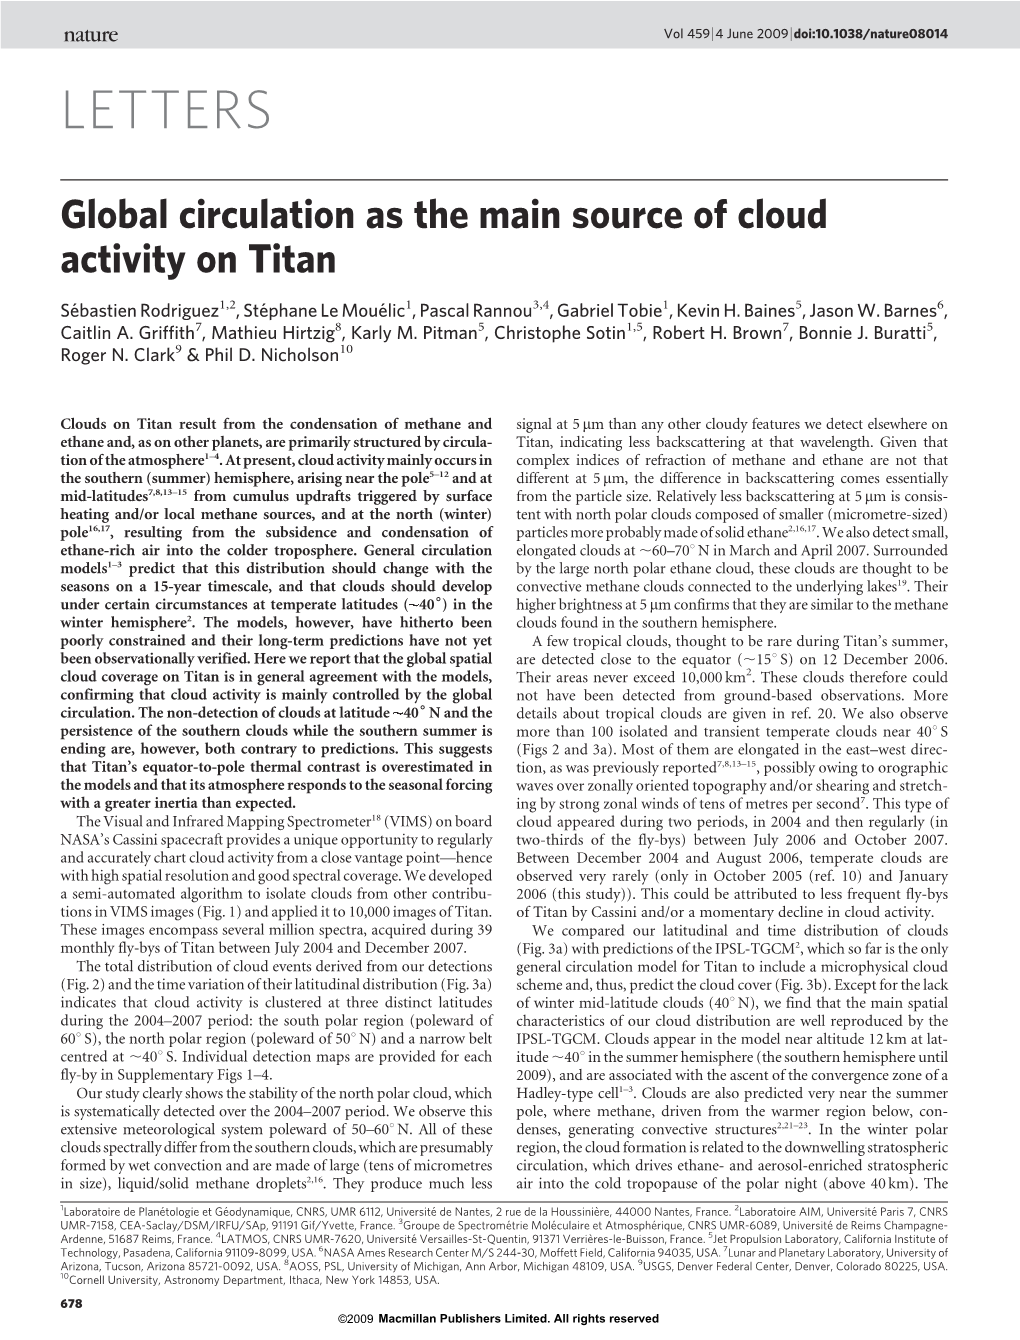 Global Circulation As the Main Source of Cloud Activity on Titan